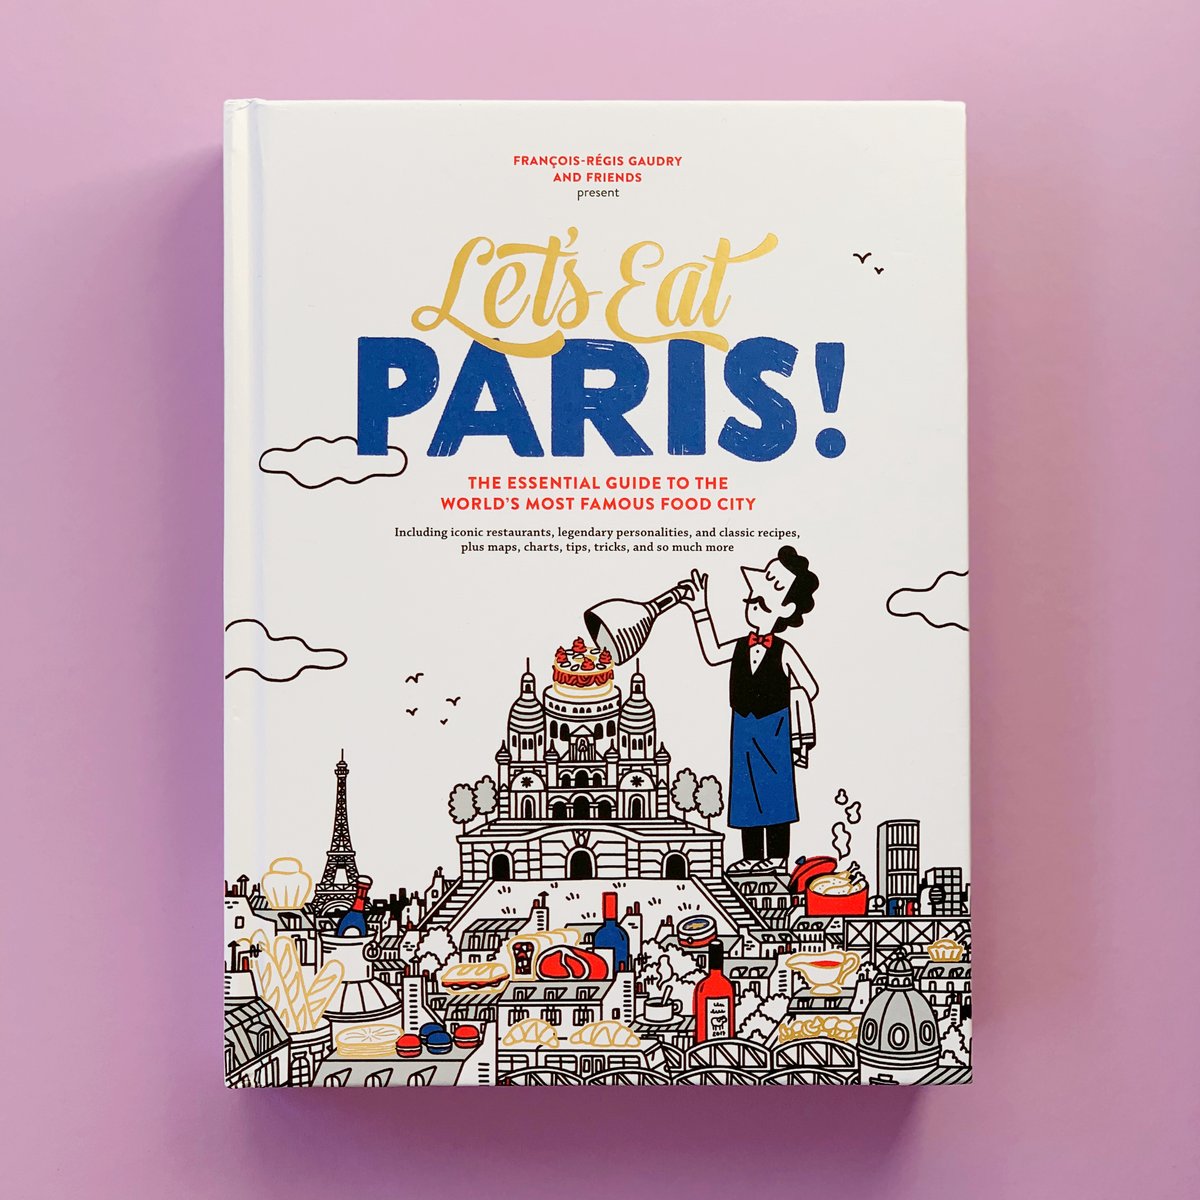 🥖 LET’S EAT PARIS! #Giveaway 🥐 #Paris is the second-most visited city in the world—and food-wise, it has no peer. To celebrate this iconic city and foodie destination, we’re giving away a bundle of must-have Parisian-inspired gifts! Enter here: bit.ly/paris-sweeps ❤️